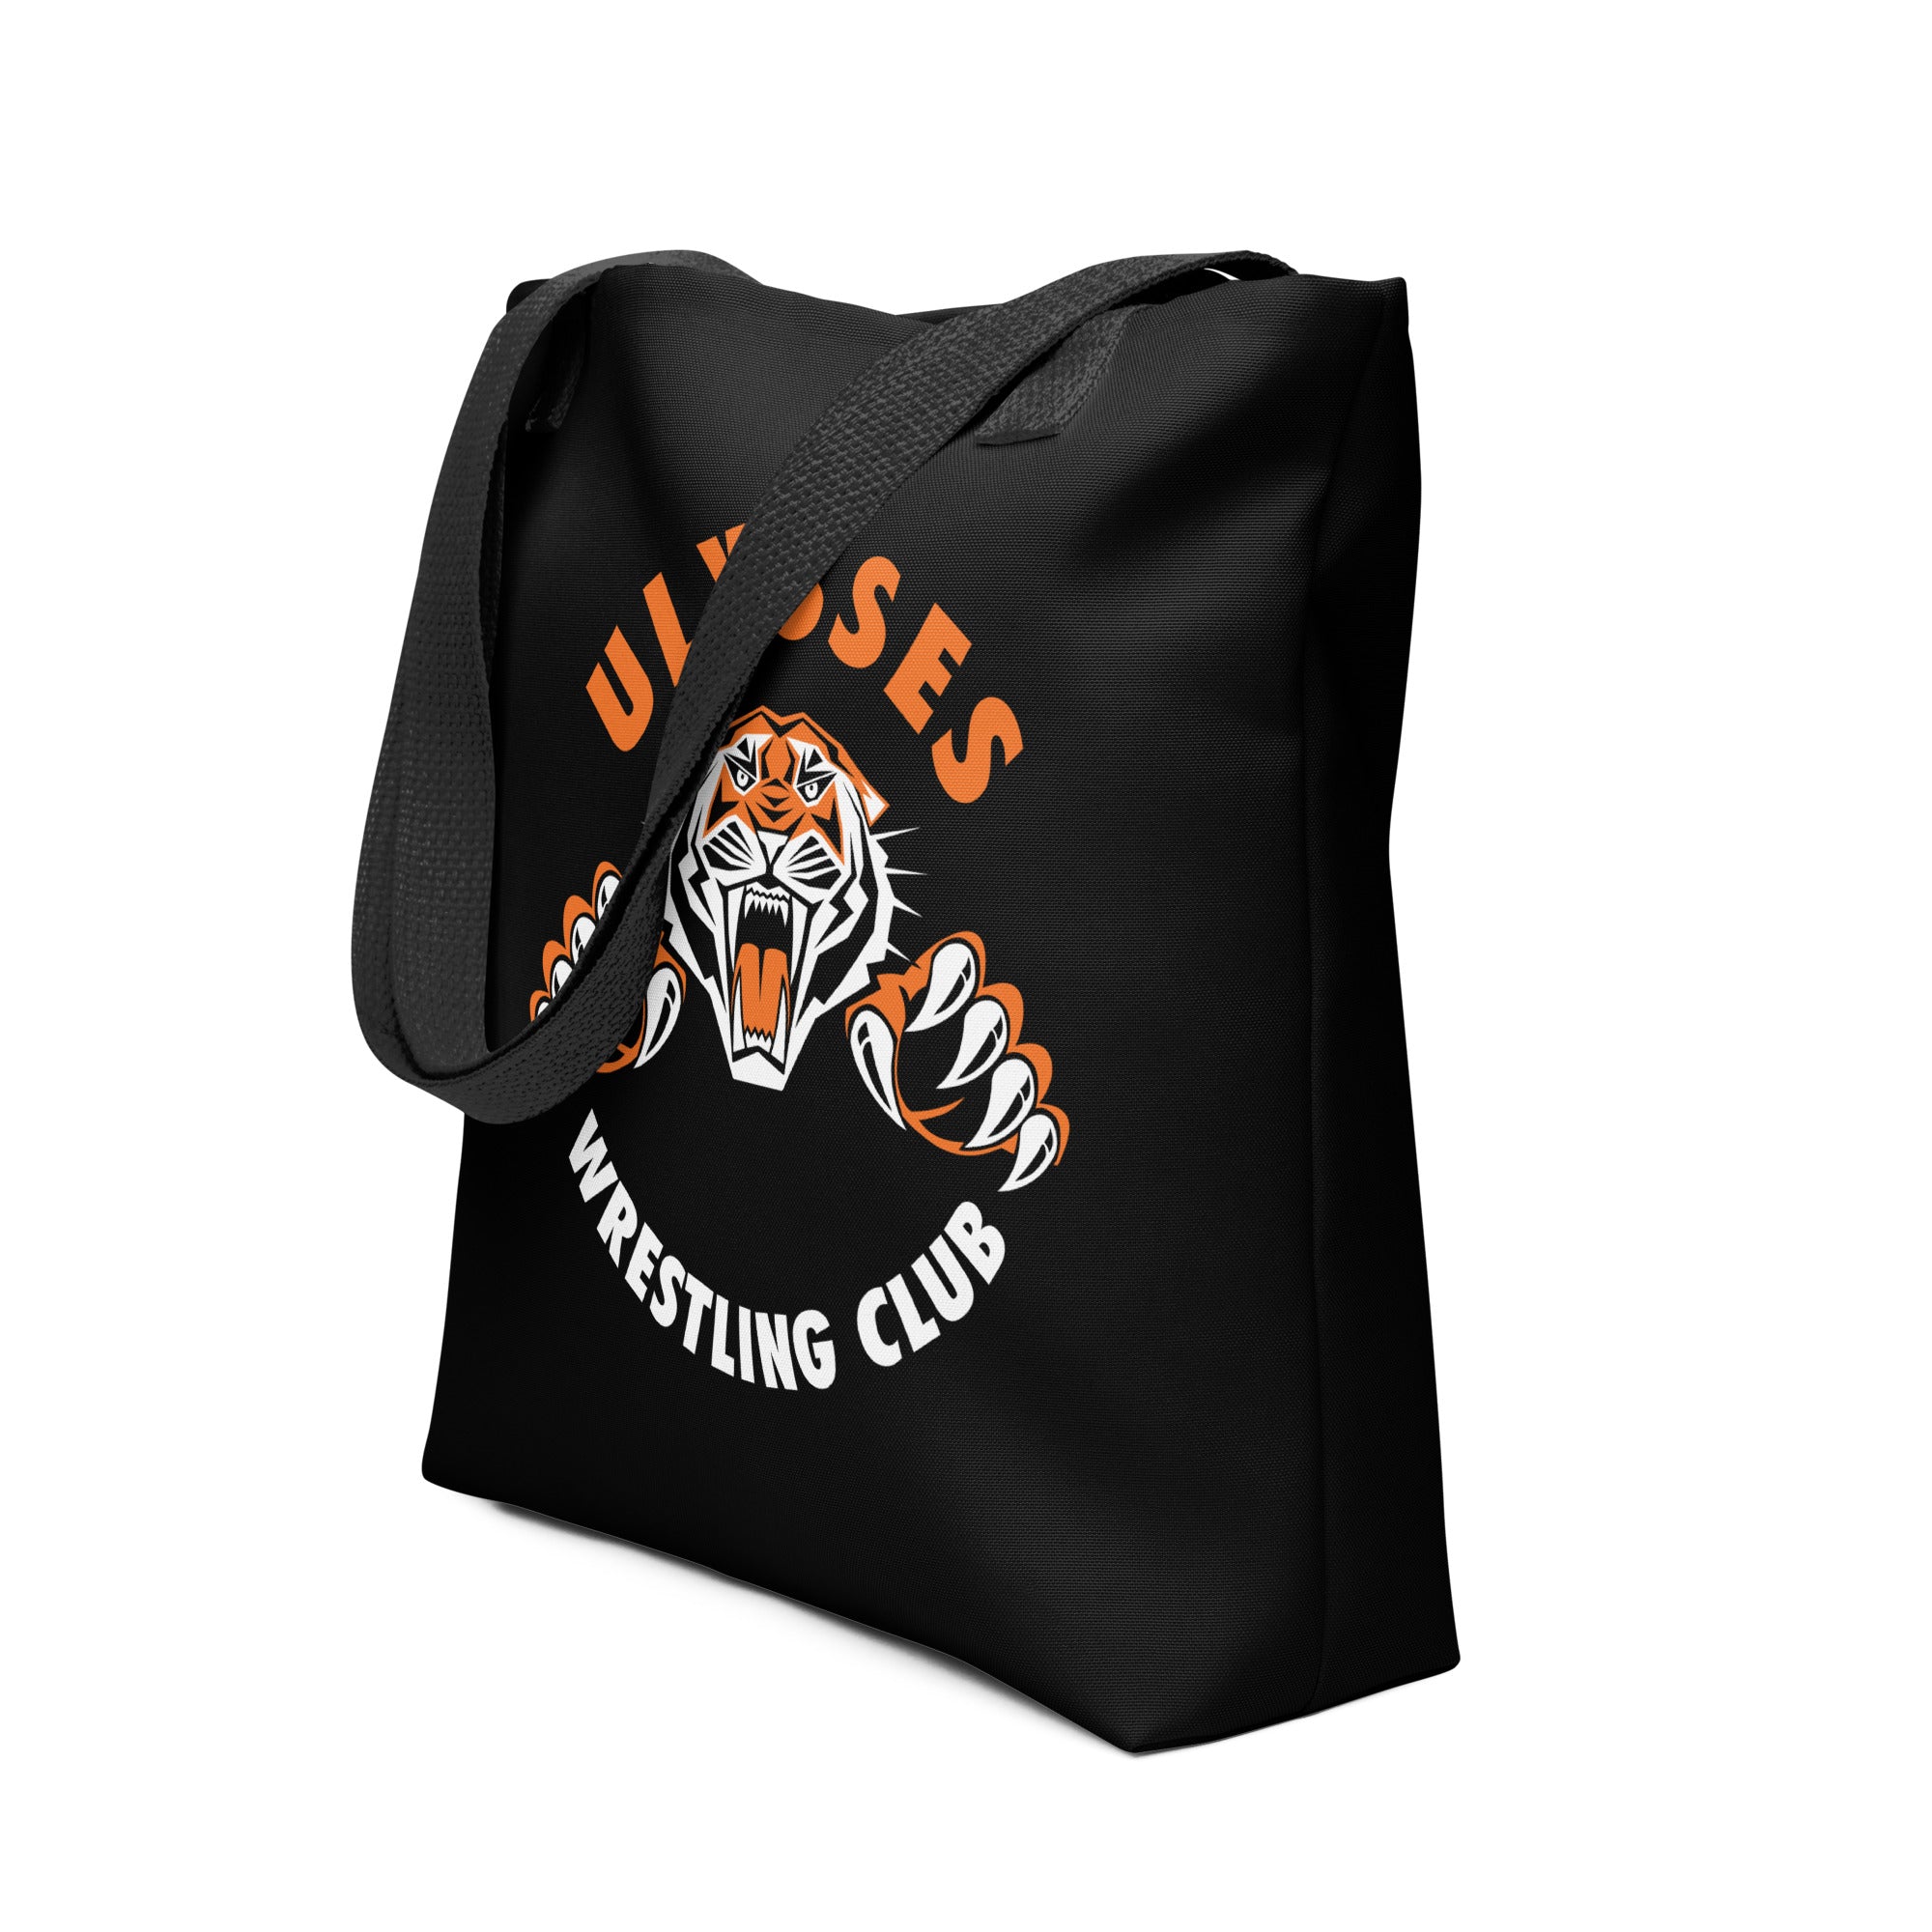 Ulysses Wrestling Club All Over Print Tote